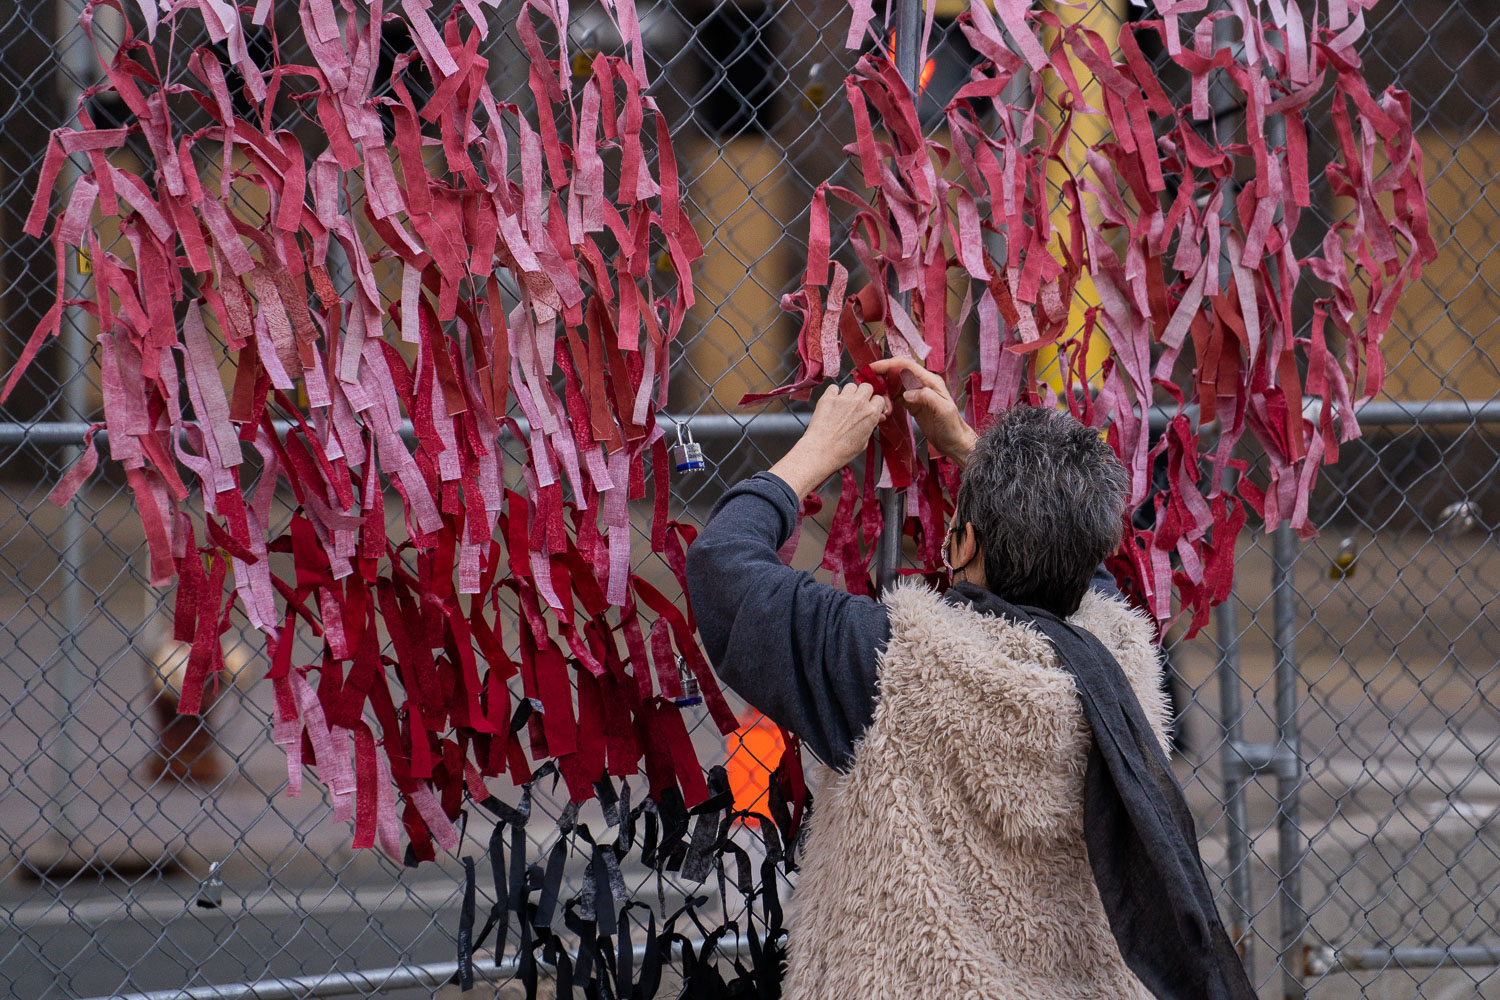 March 29, 2021 - Minneapolis -- A woman ties ribbons in the shape of a heart to security fencing around the Hennepin County Government Center on the day opening statements began in the Derek Chauvin murder trial. Chauvin is accused of murdering George Floyd on May 25th, 2020.